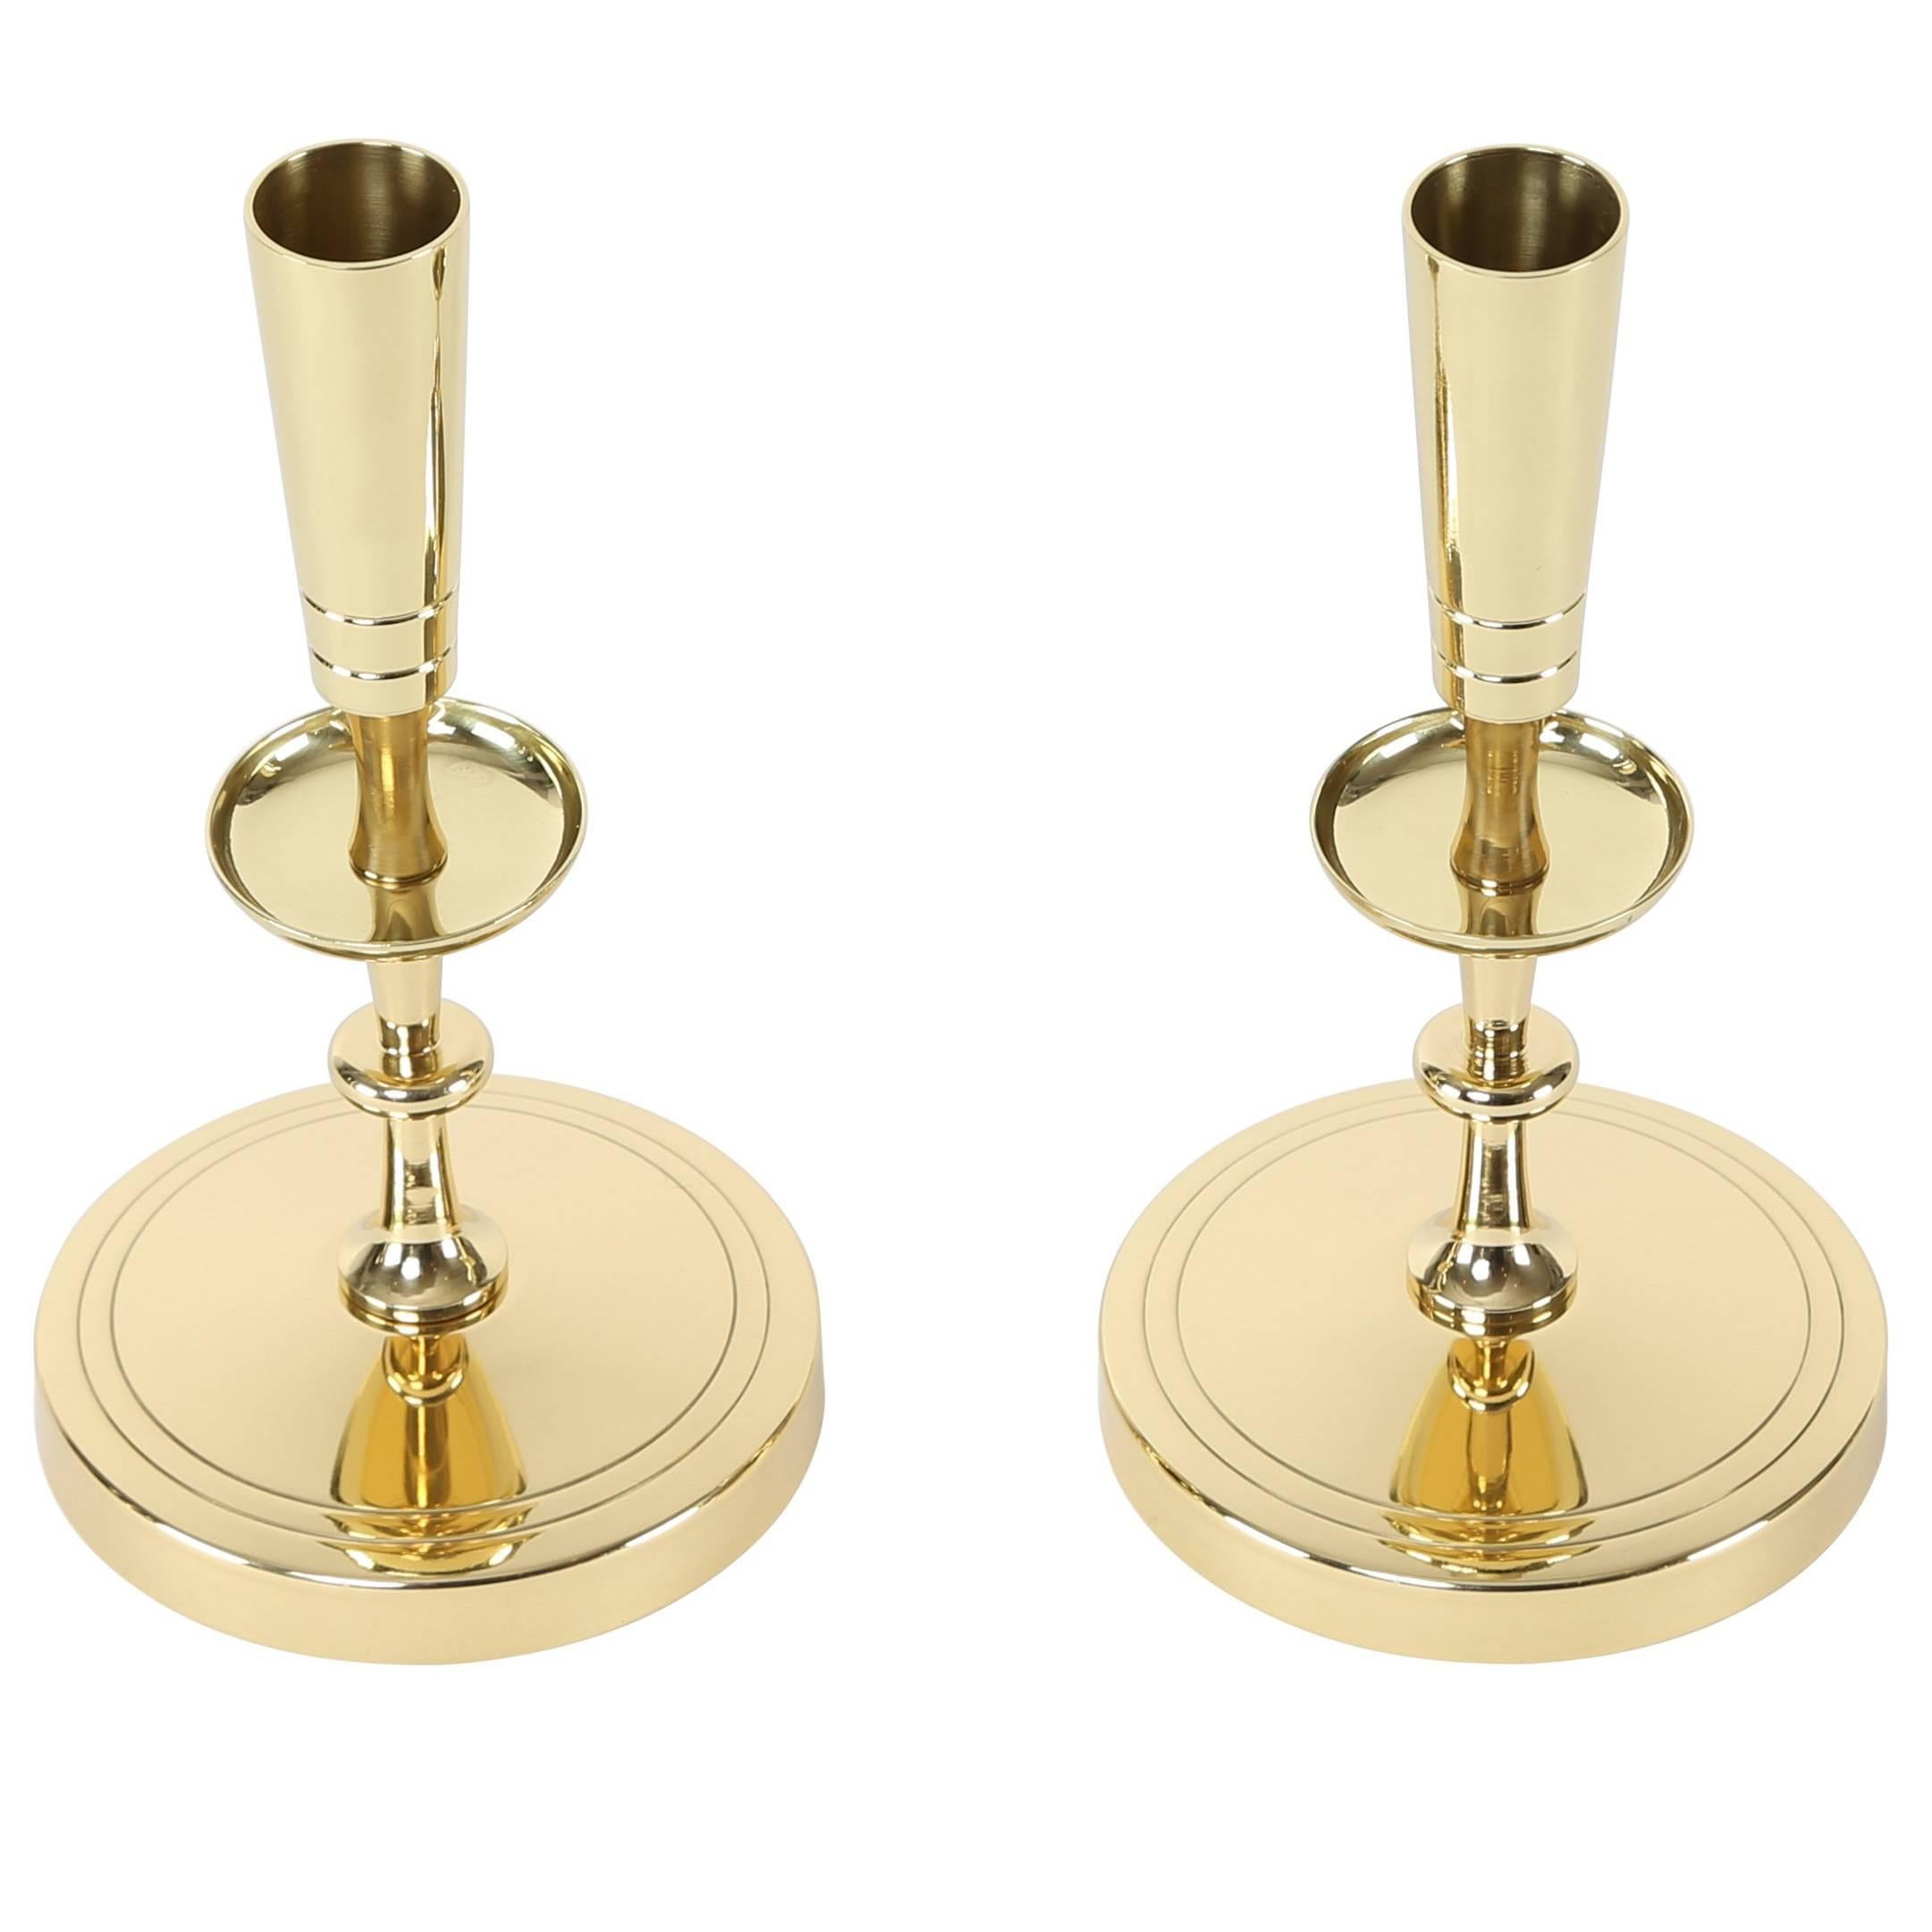 Pair of Tommi Parzinger Brass Candleholders, circa 1950s For Sale